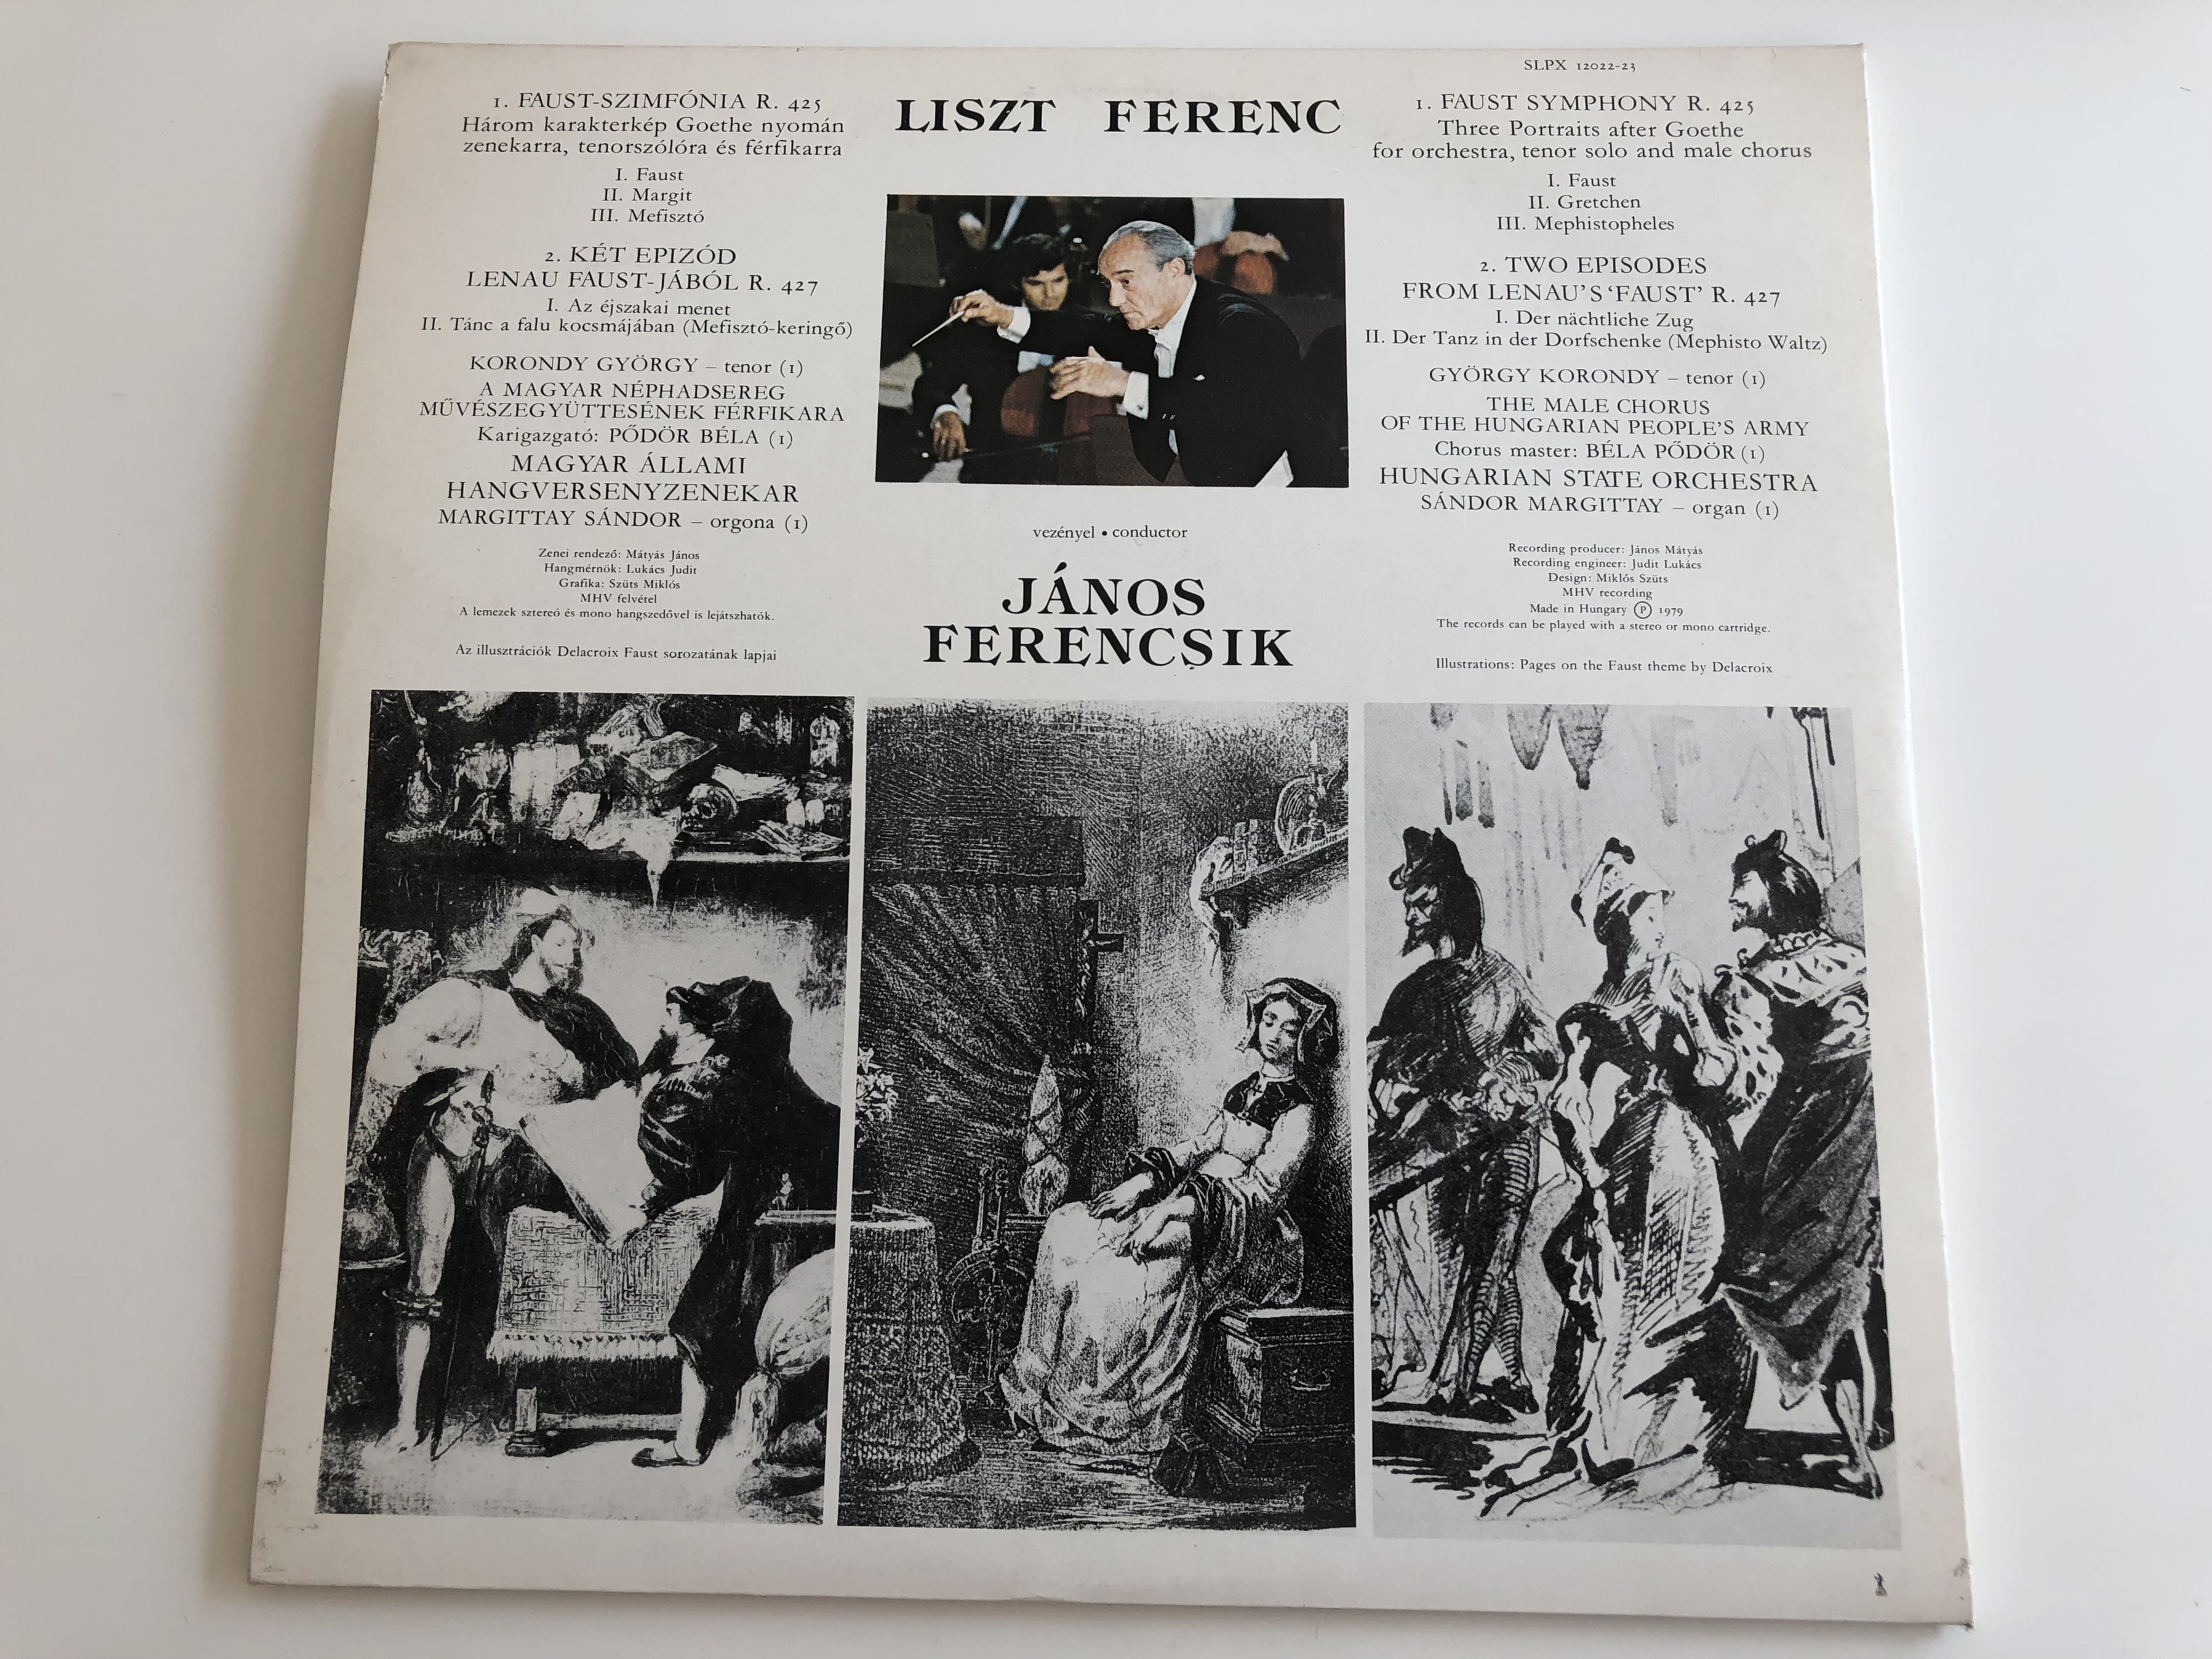 liszt-faust-symphony-two-episodes-from-lenau-s-faust-gy-rgy-korondy-hungarian-state-orchestra-conducted-j-nos-ferencsik-hungaroton-2x-lp-stereo-slpx-12022-23-4-.jpg